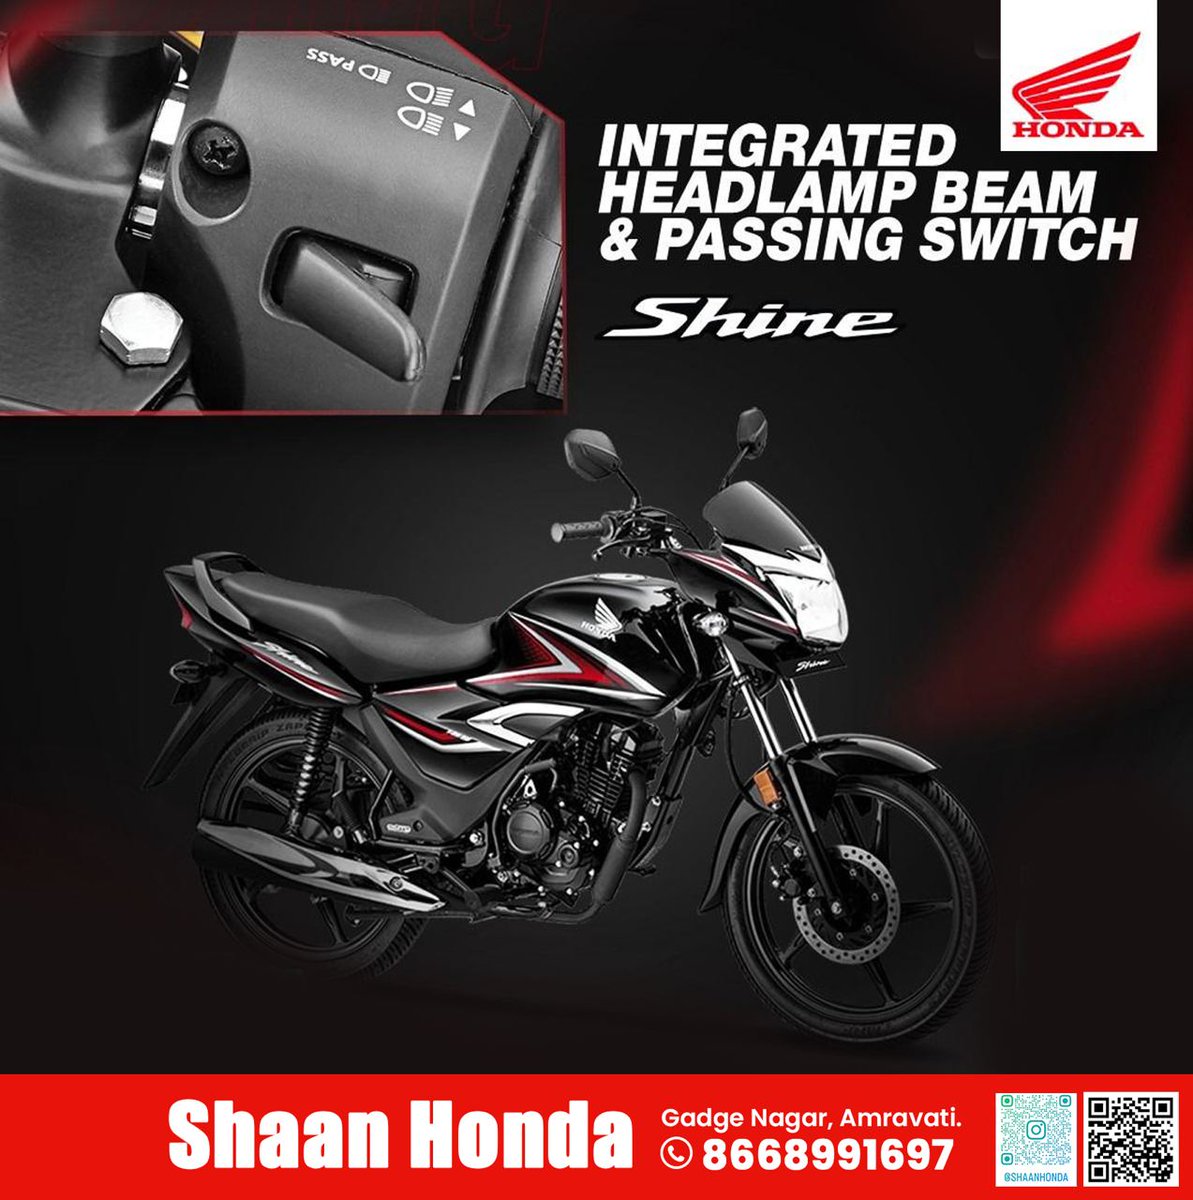 The Honda Shine is powered by a 124cc, air-cooled, single-cylinder engine that produces a maximum power of 10.59 bhp and a peak torque of 11 Nm. The engine is paired with a 5-speed manual gearbox.
#hondashine #honda #activa #g #hondabike #hondaactiva #hondadio #hondamotorcycles